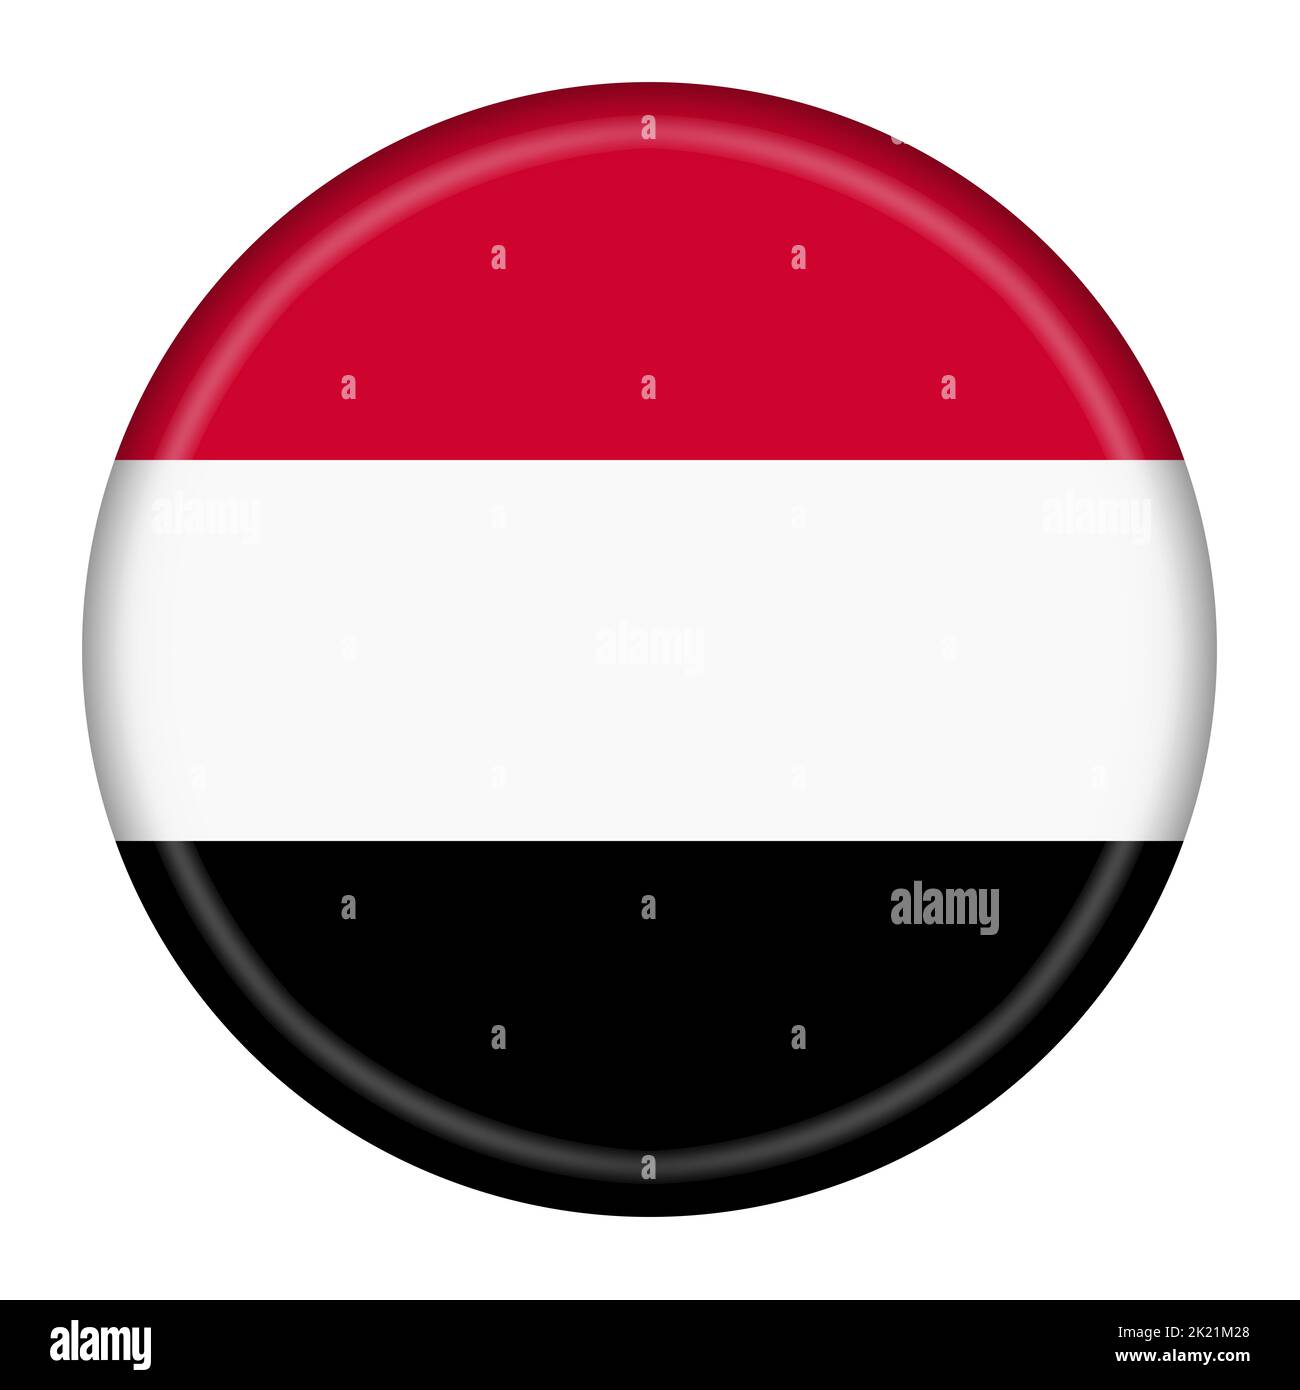 A Yemen flag button 3d illustration with clipping path Stock Photo